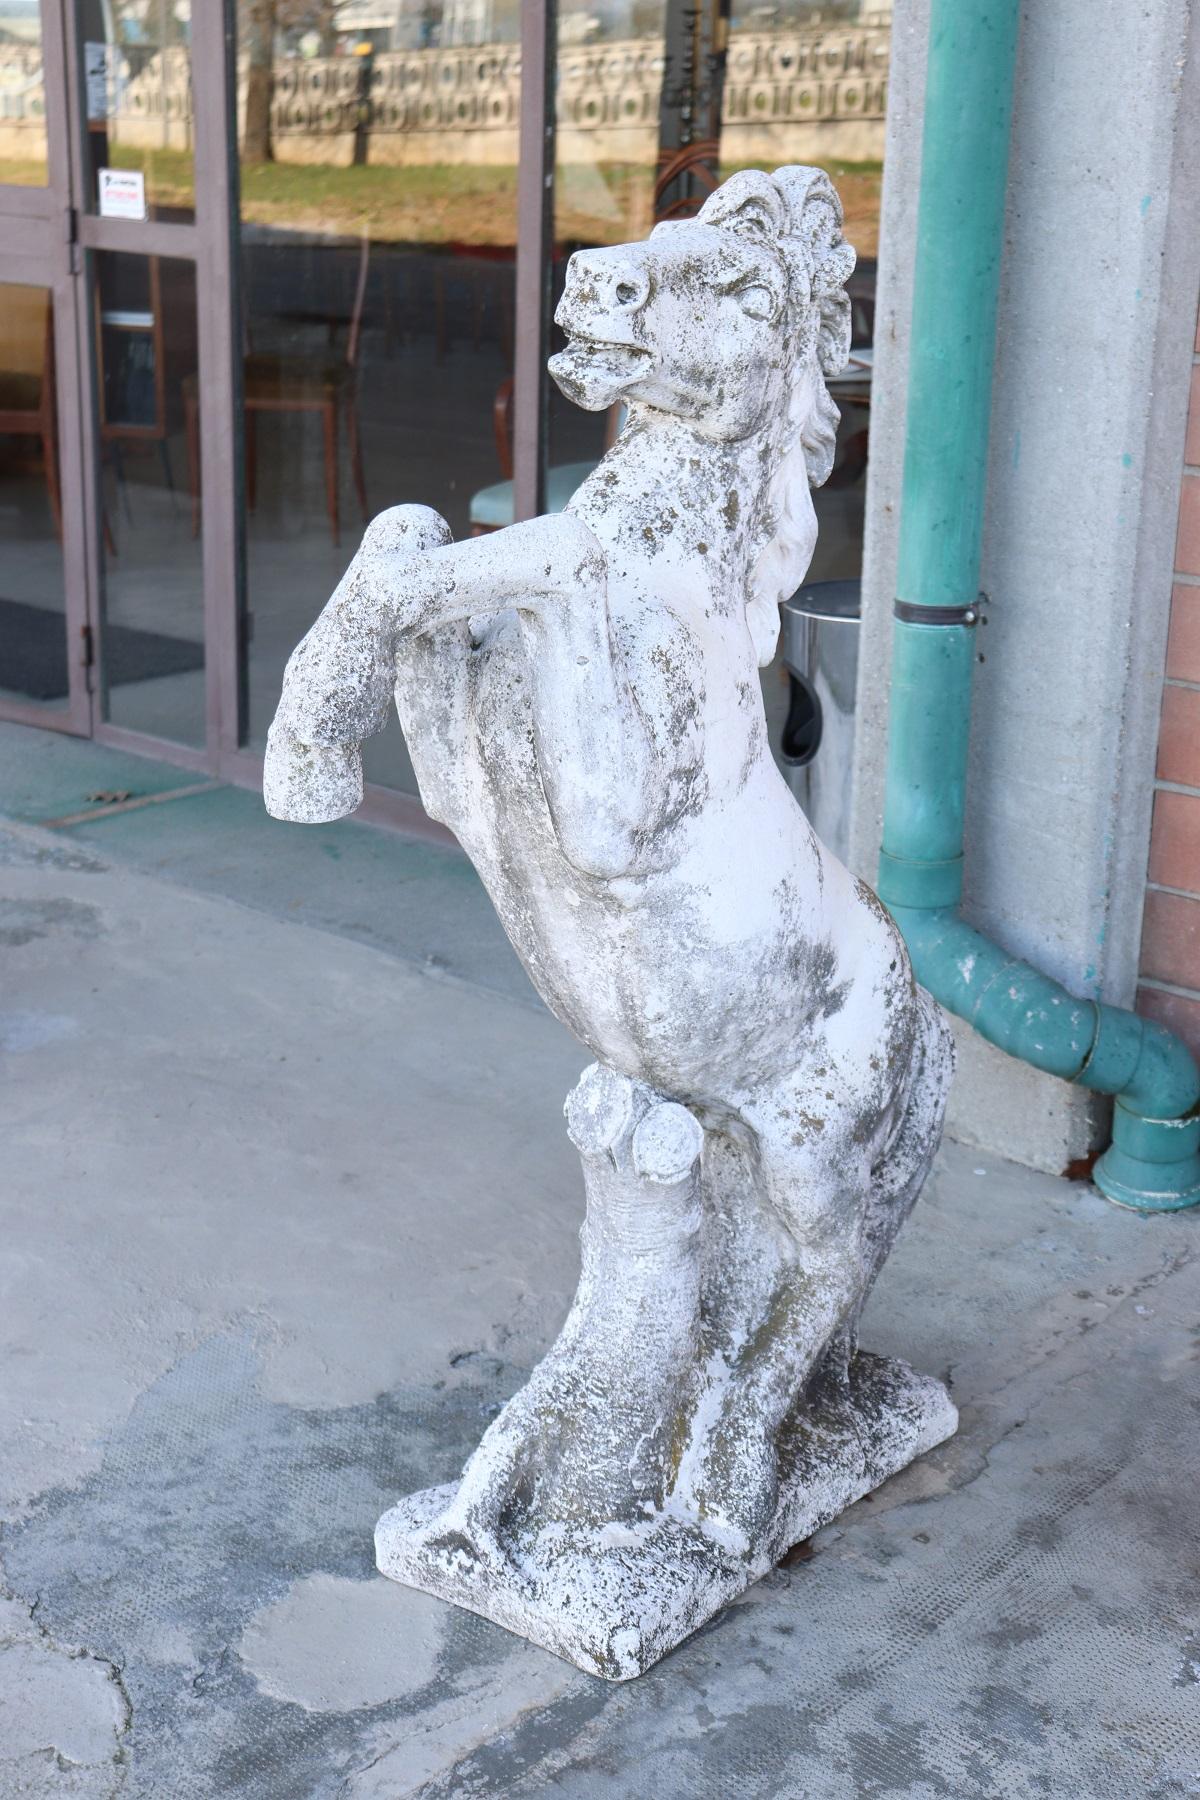 Beautiful refined garden horse statue, circa 1930s main material stone mixed with gravel and cement. Beautiful and majestic statue. The stone shows signs of the passage of time. This statue is perfect for embellishing an important garden.